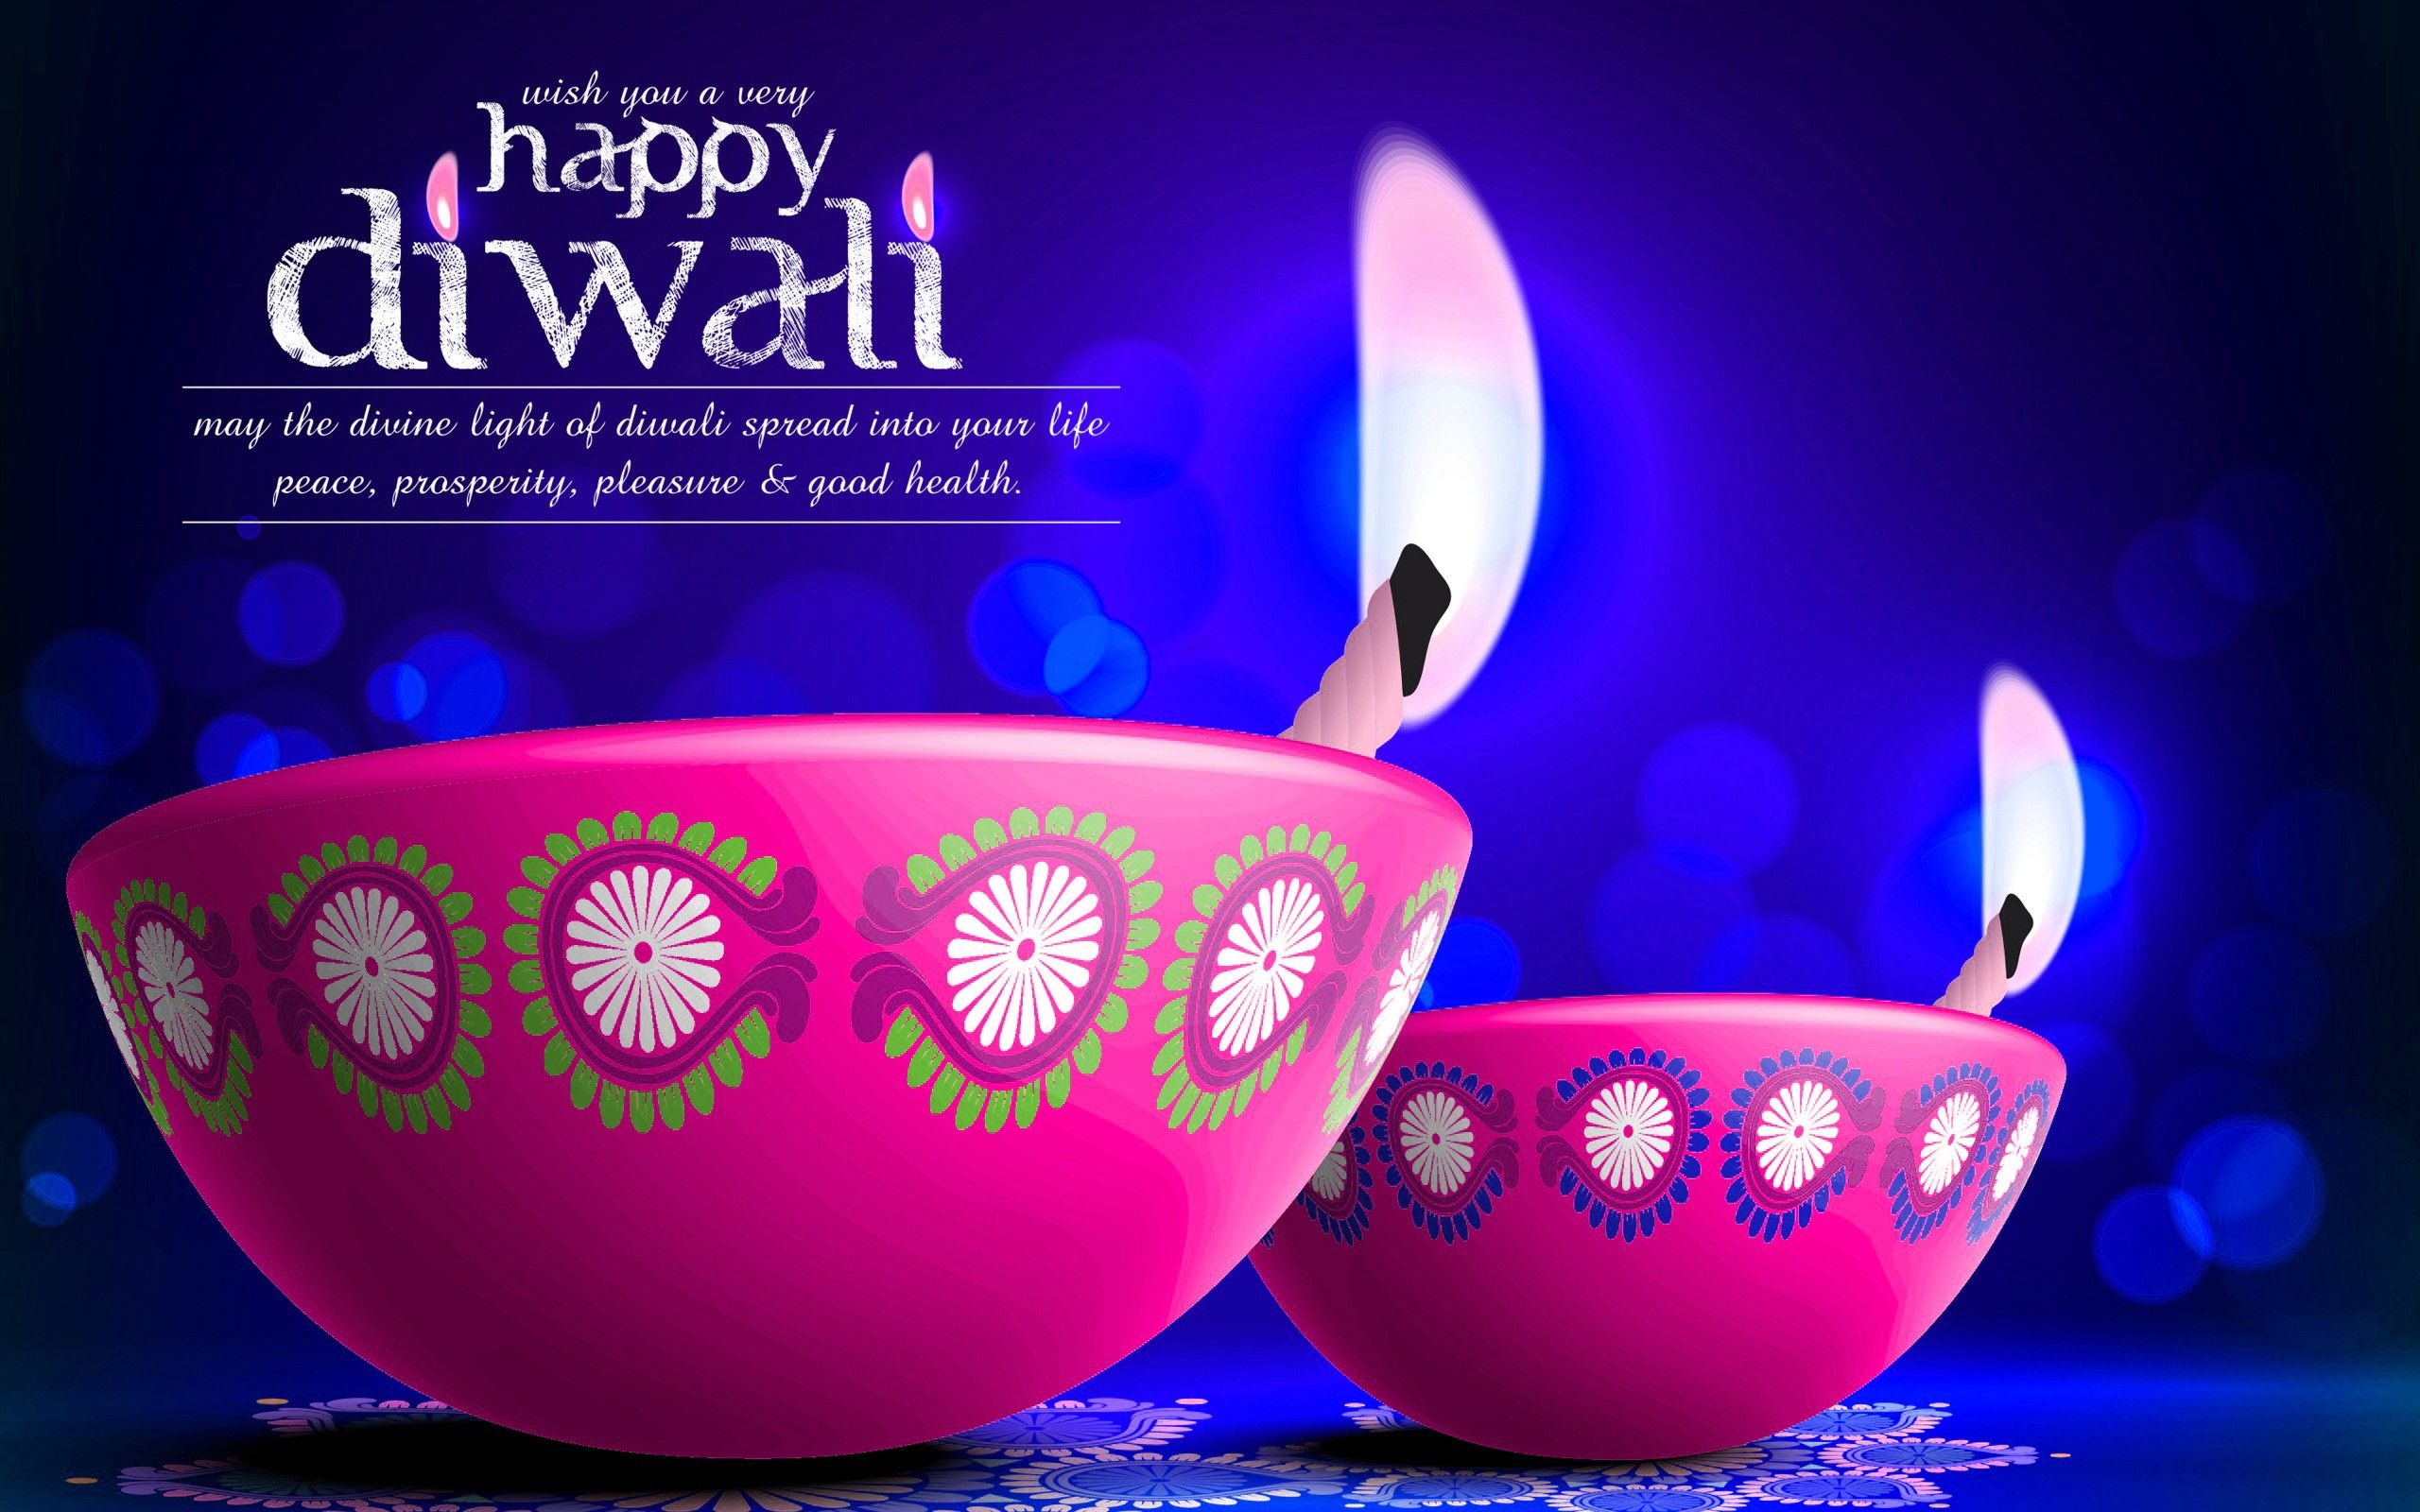 Happy Diwali - , quotes, wishes, SMS, greetings, messages, picture, photo and wallpaper